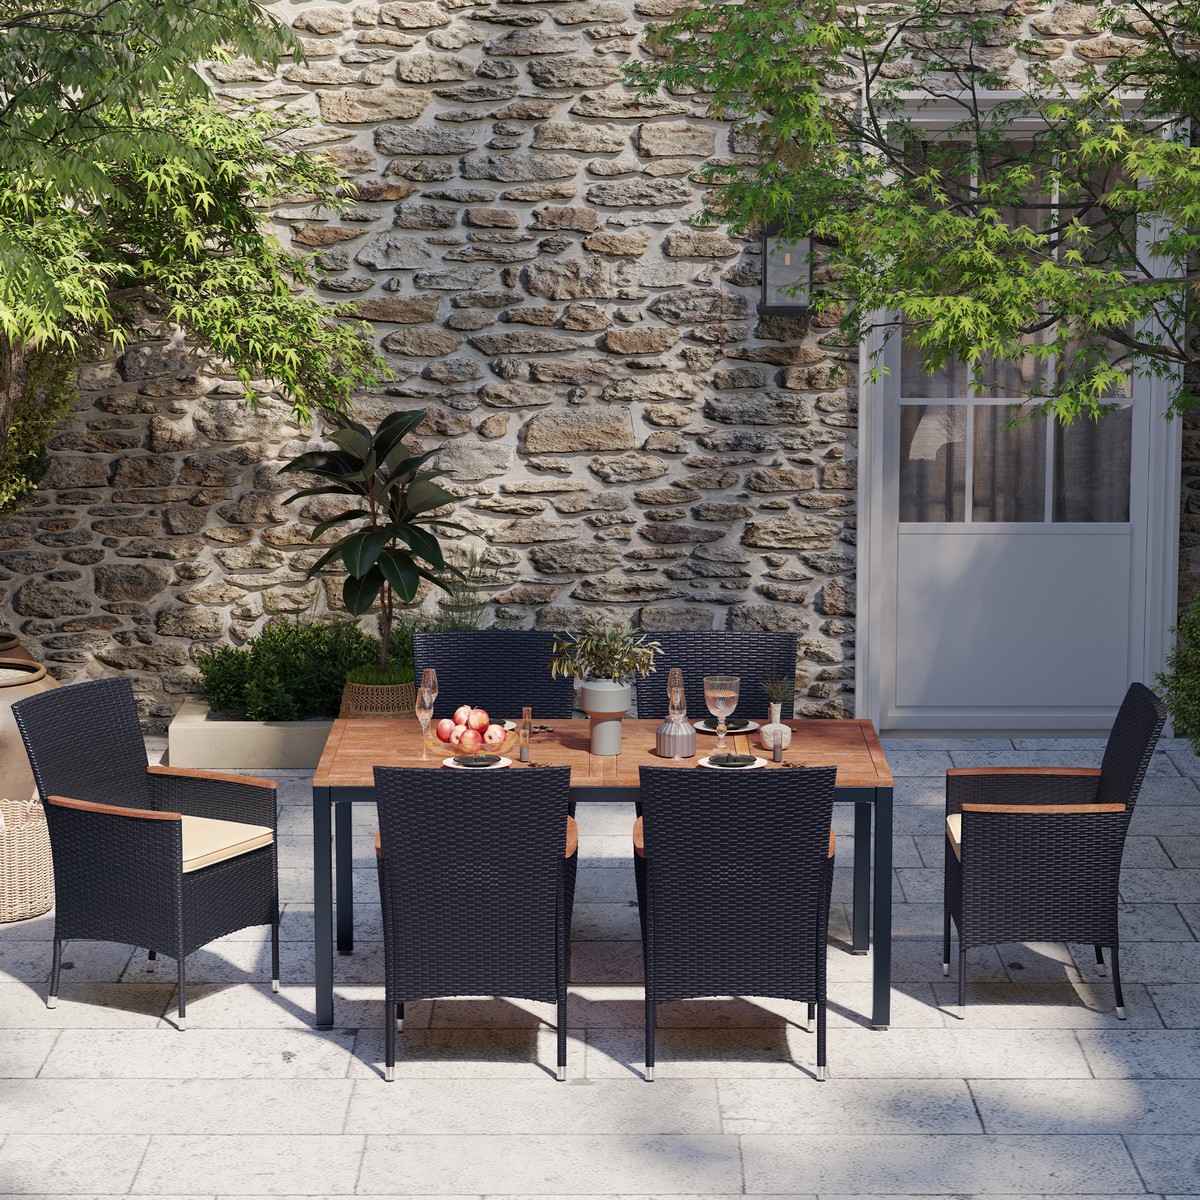 OVE DECORS 15PKB-DE1A07-GR1VV DENISON 7-PIECE OUTDOOR DINING SET IN BLACK AND BROWN